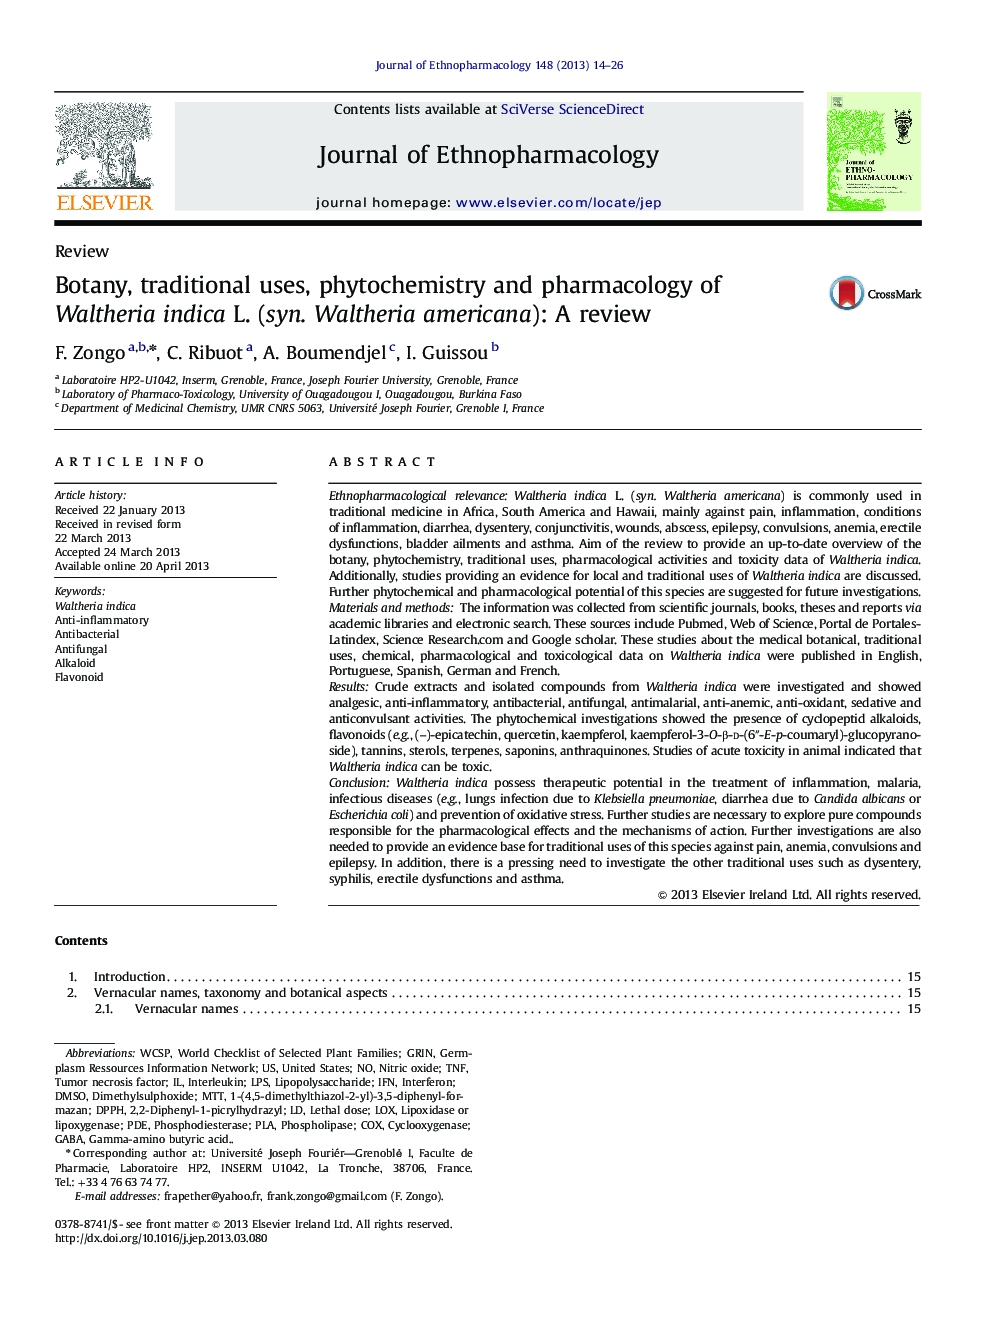 Botany, traditional uses, phytochemistry and pharmacology of Waltheria indica L. (syn. Waltheria americana): A review